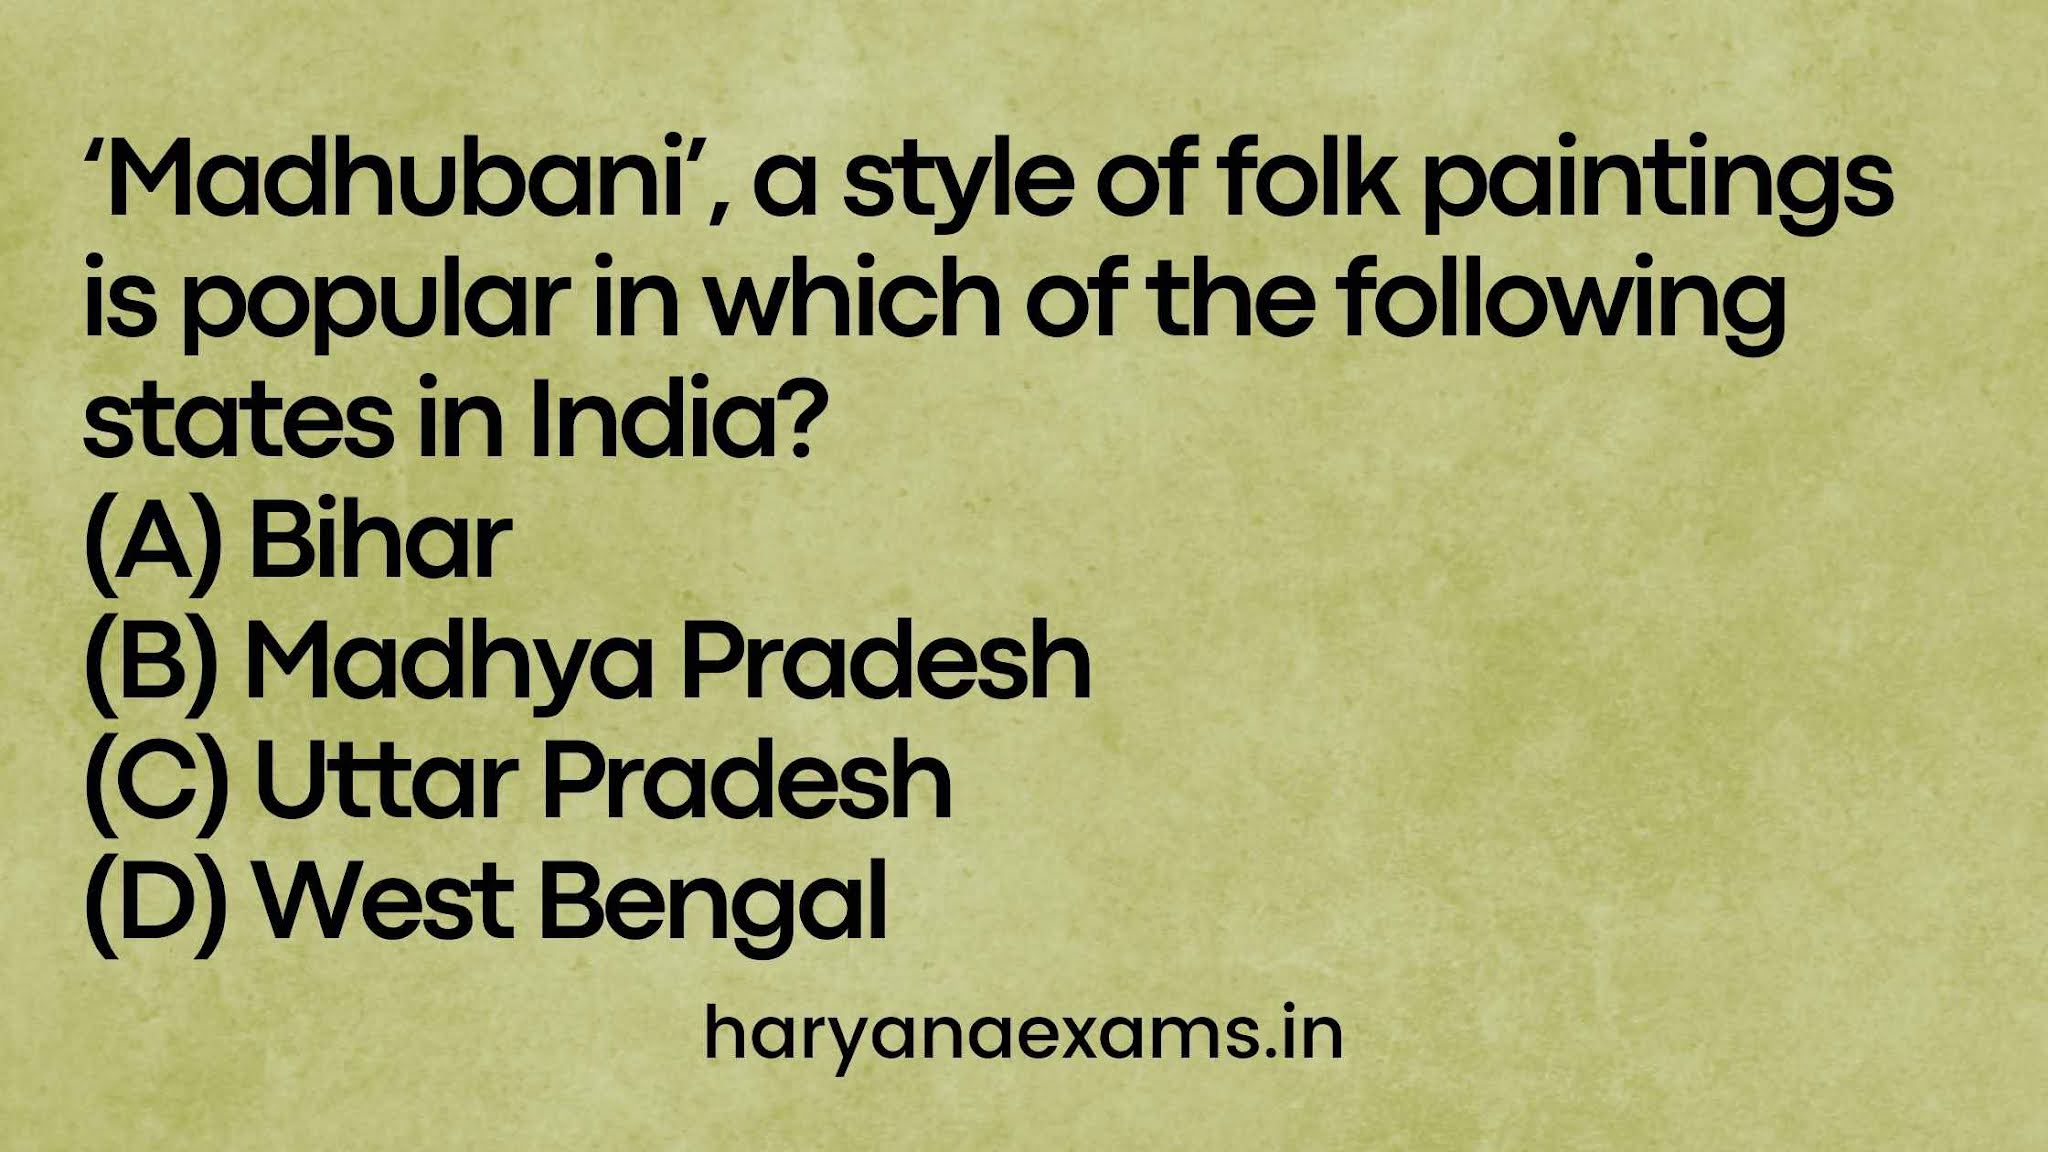 ‘Madhubani’, a style of folk paintings is popular in which of the following states in India? (A) Bihar (B) Madhya Pradesh (C) Uttar Pradesh (D) West Bengal